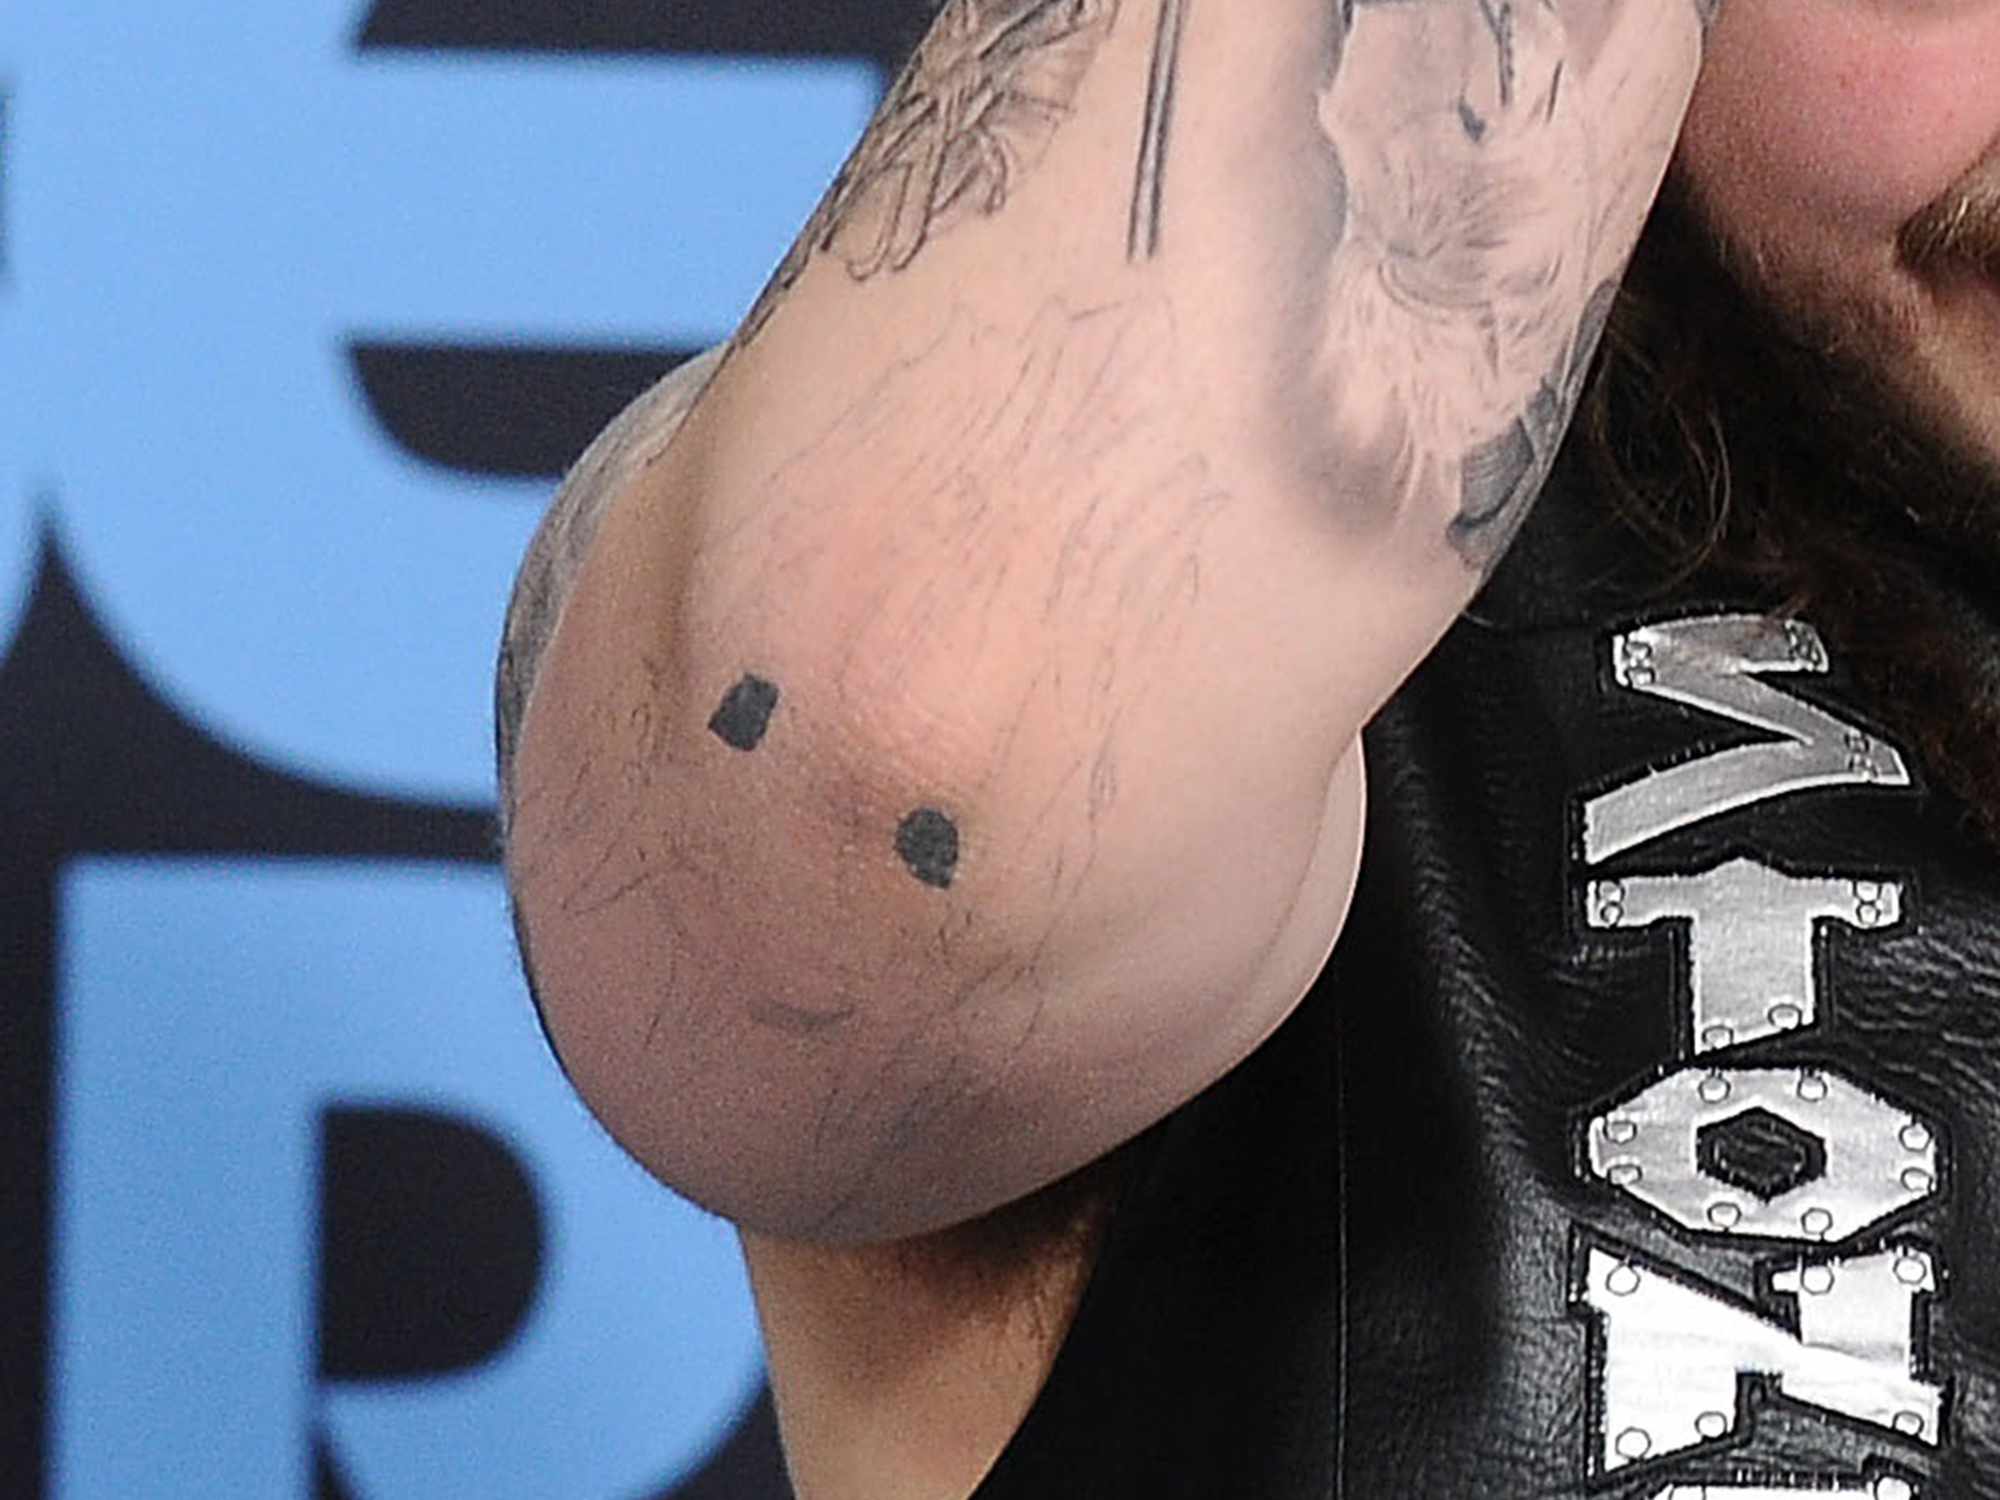 Post Malone (tattoo detail) attends the 2017 BET Awards at Microsoft Theater on June 25, 2017 in Los Angeles, California